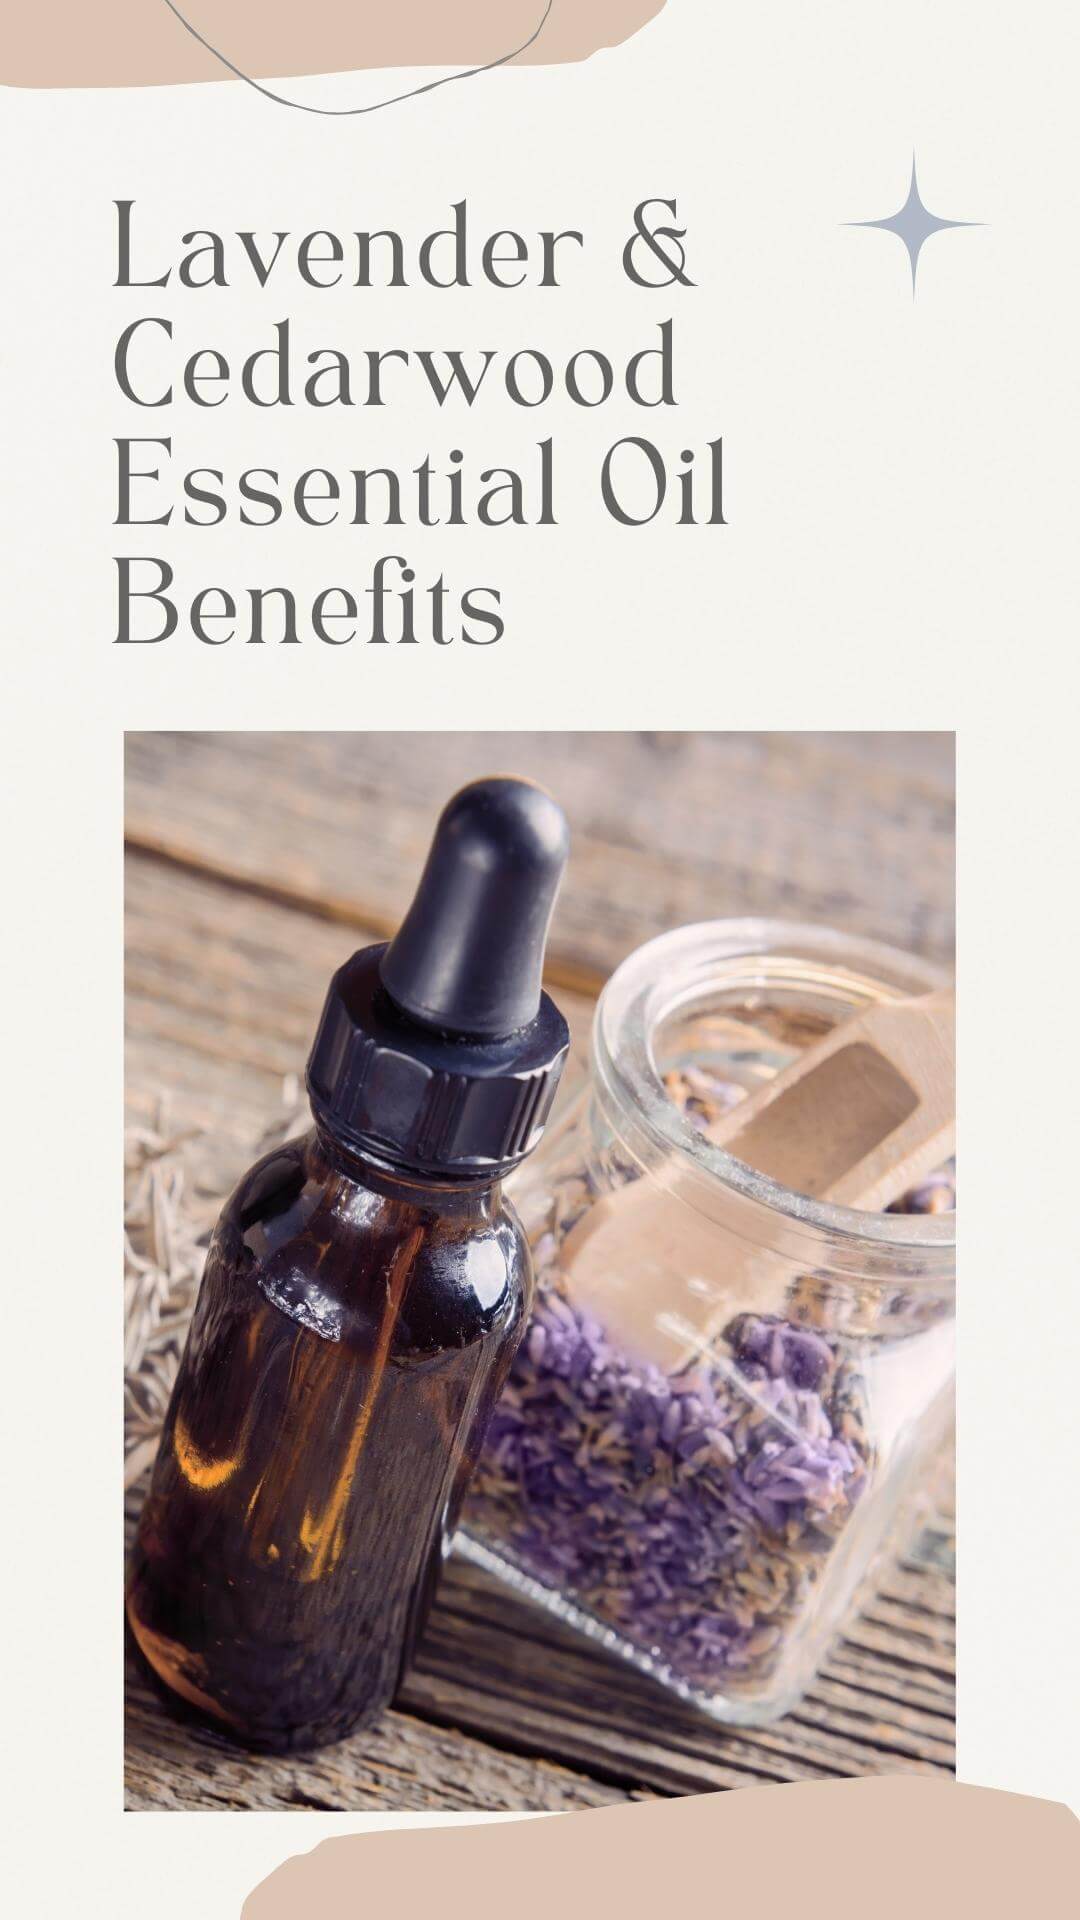 Lavender and Cedarwood Benefits and Uses